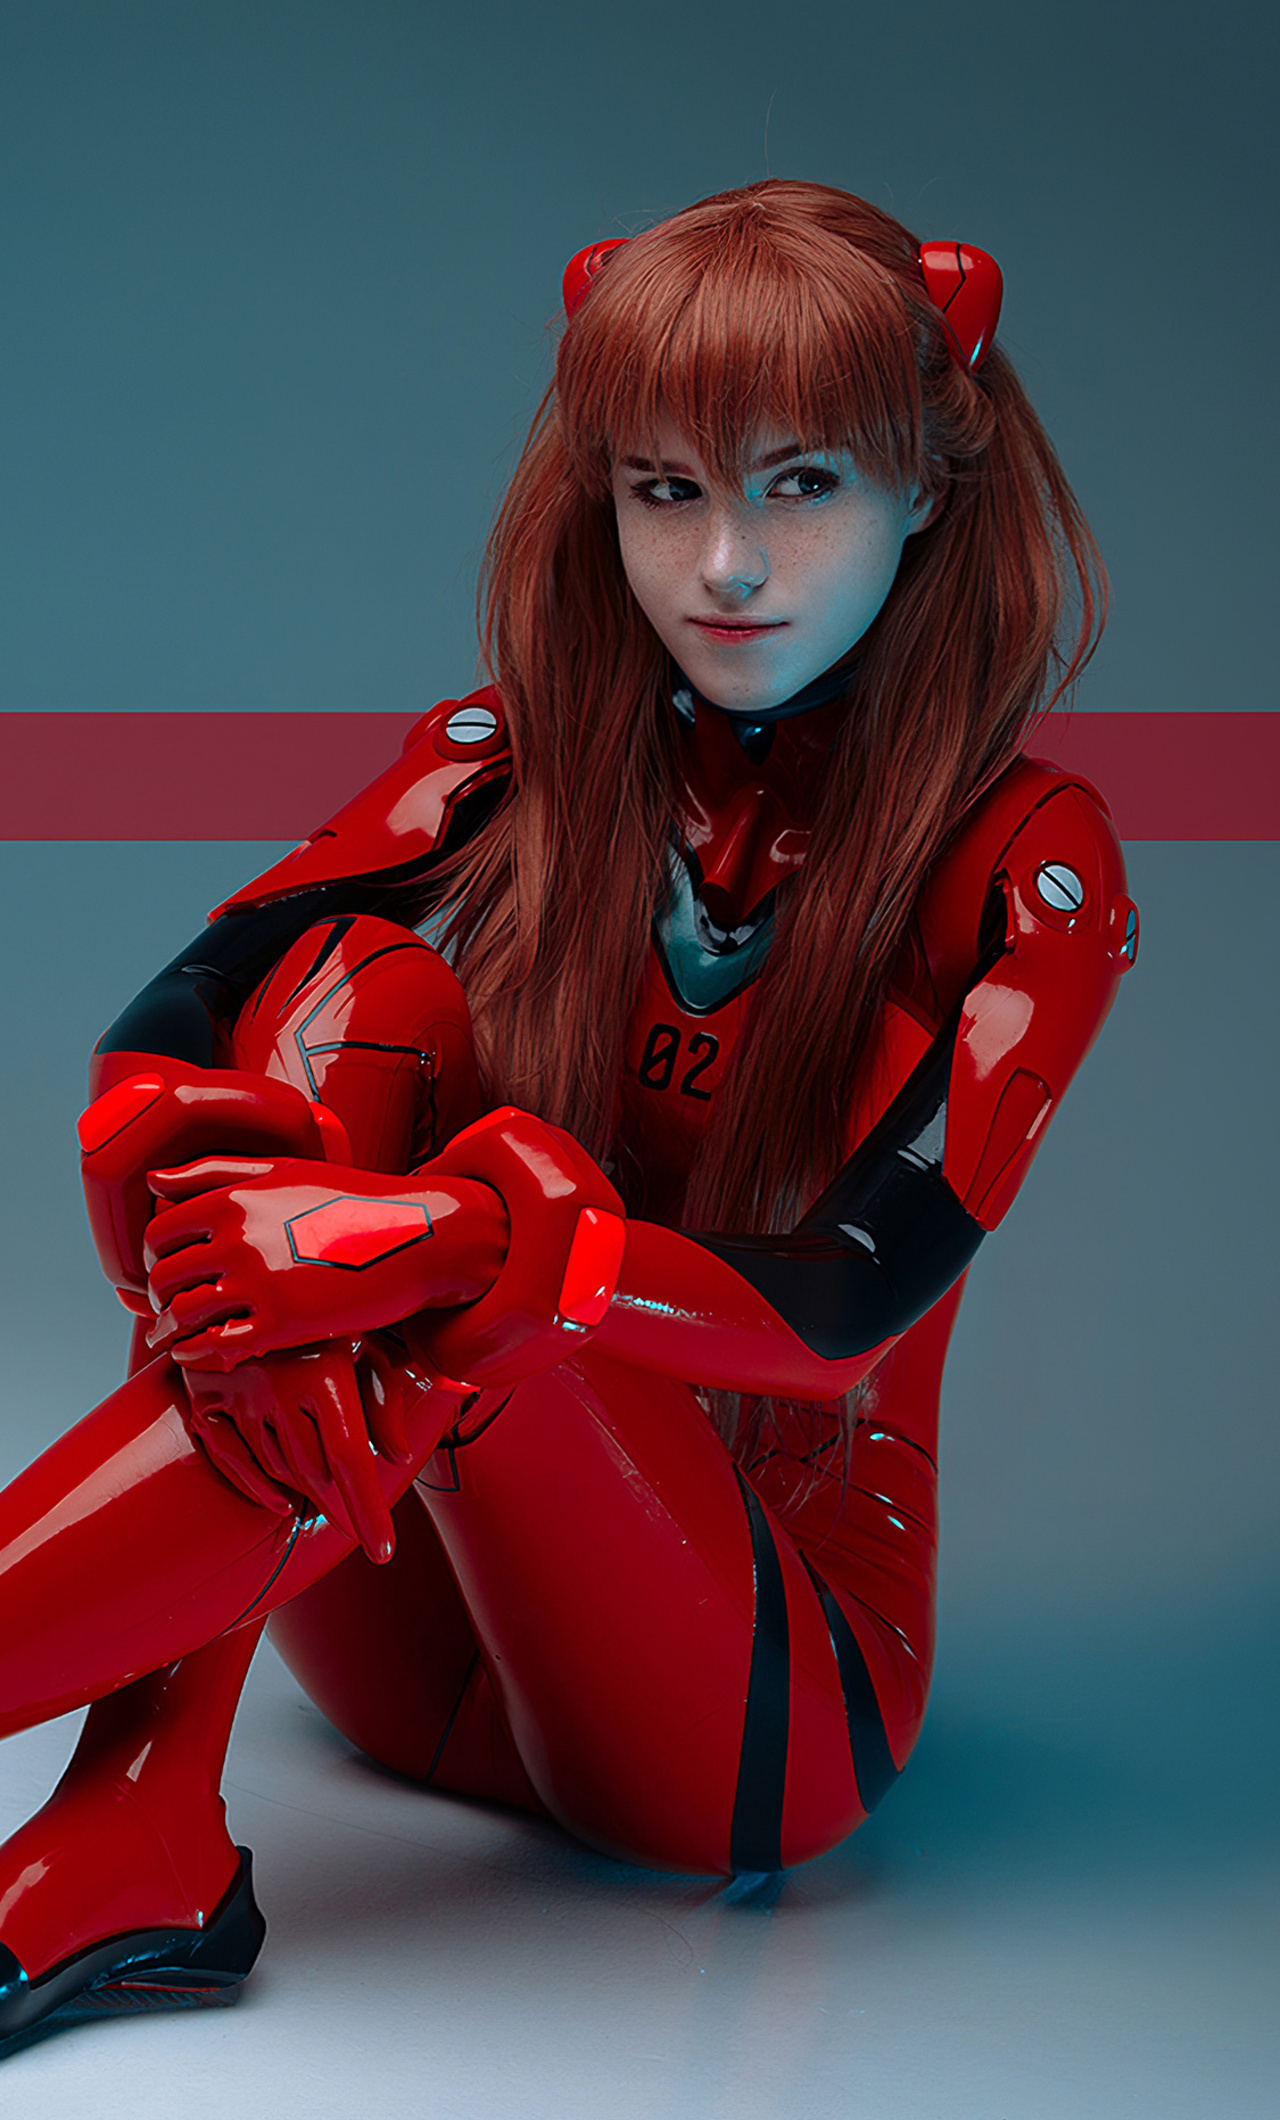 1280x2120 Evangelion Asuka Anime Girl Cosplay Iphone 6 Hd 4k Wallpapers Images Backgrounds